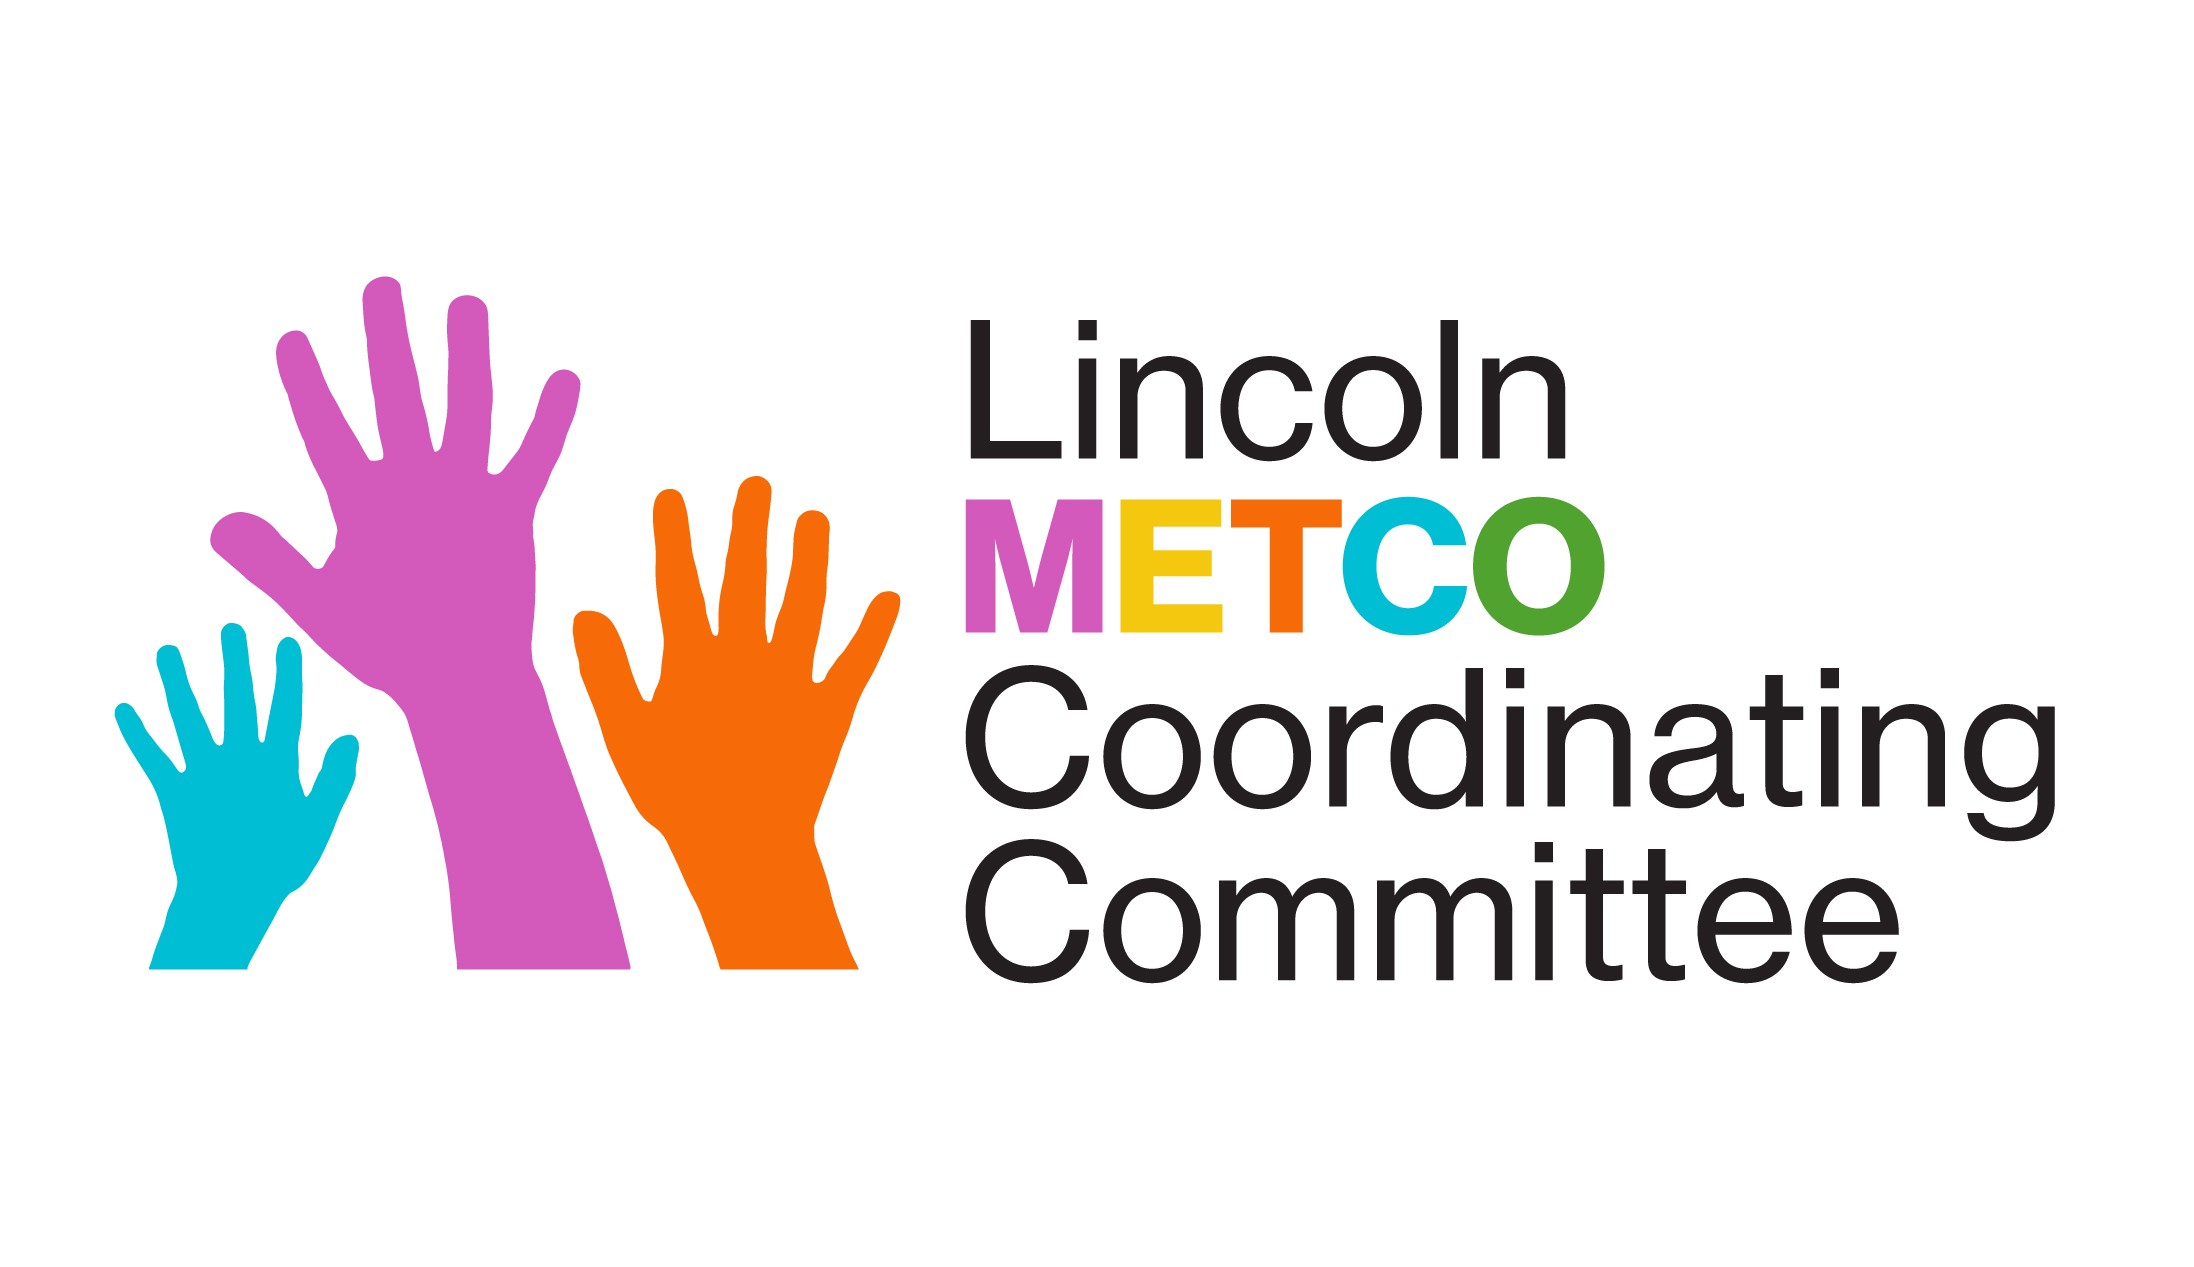 Lincoln METCO Coordinating Committee logo